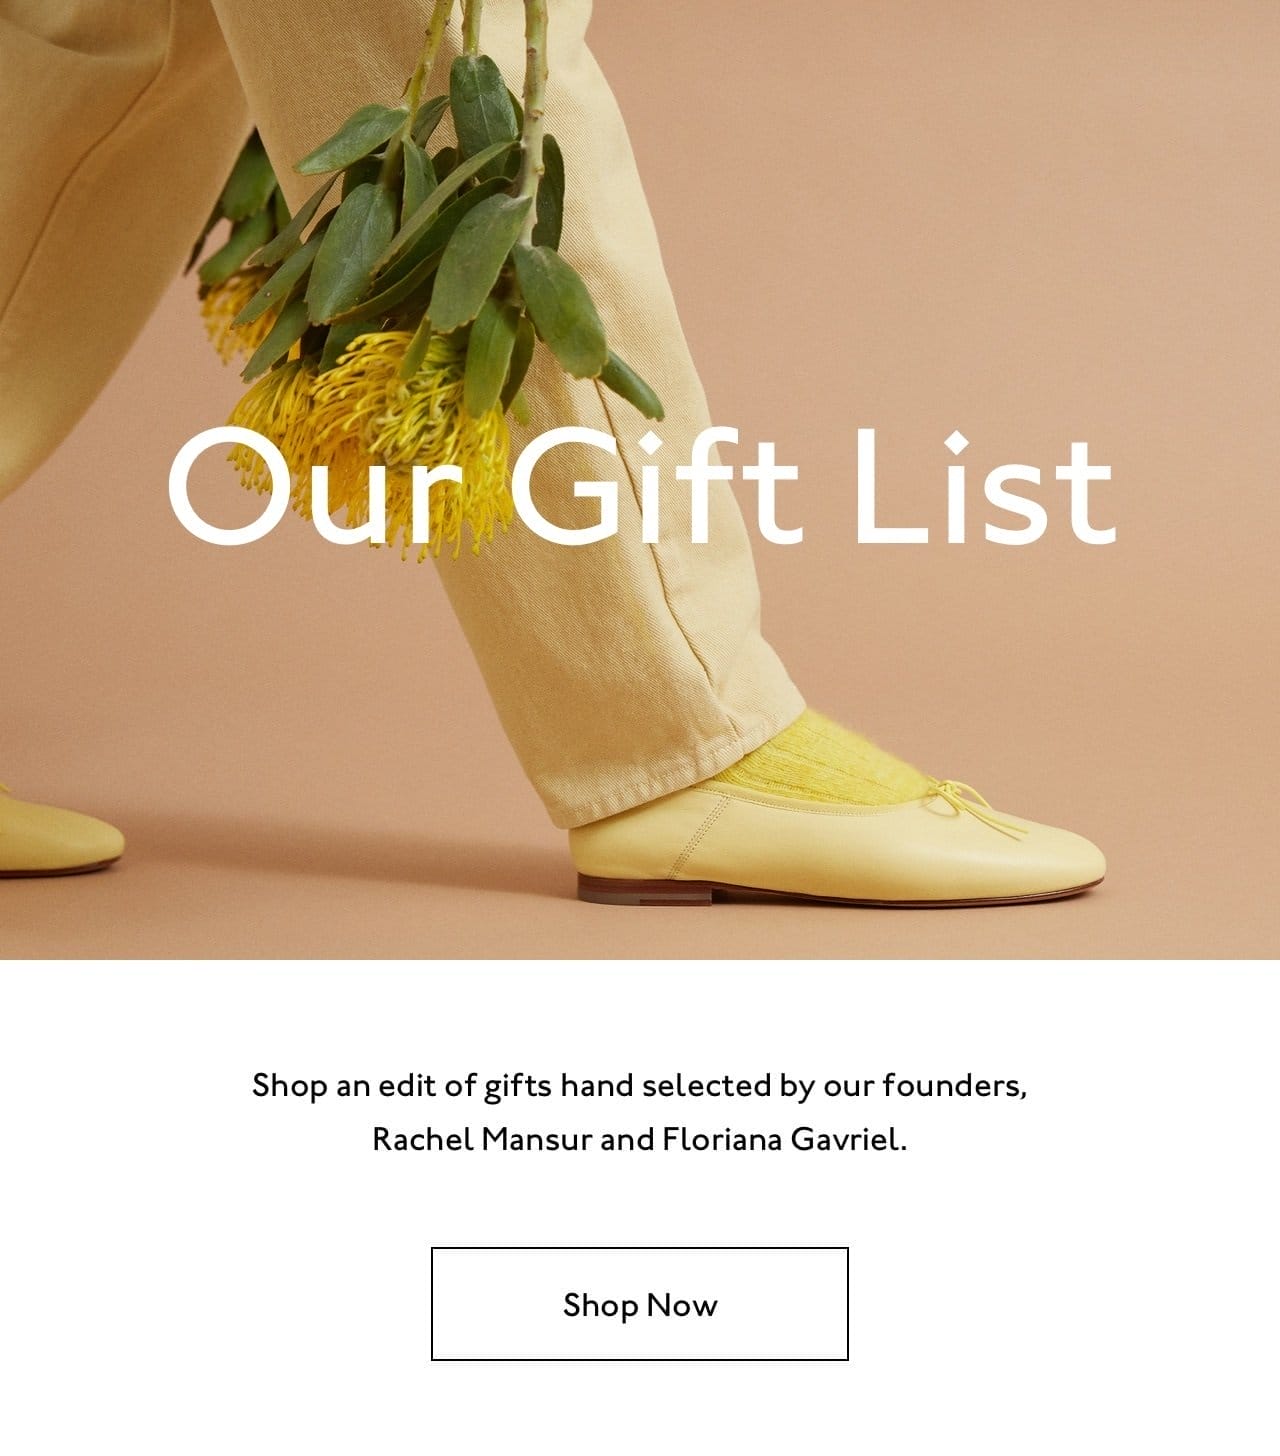 Shop an edit of gifts hand selected by our founders, Rachel Mansur and Floriana Gavriel.